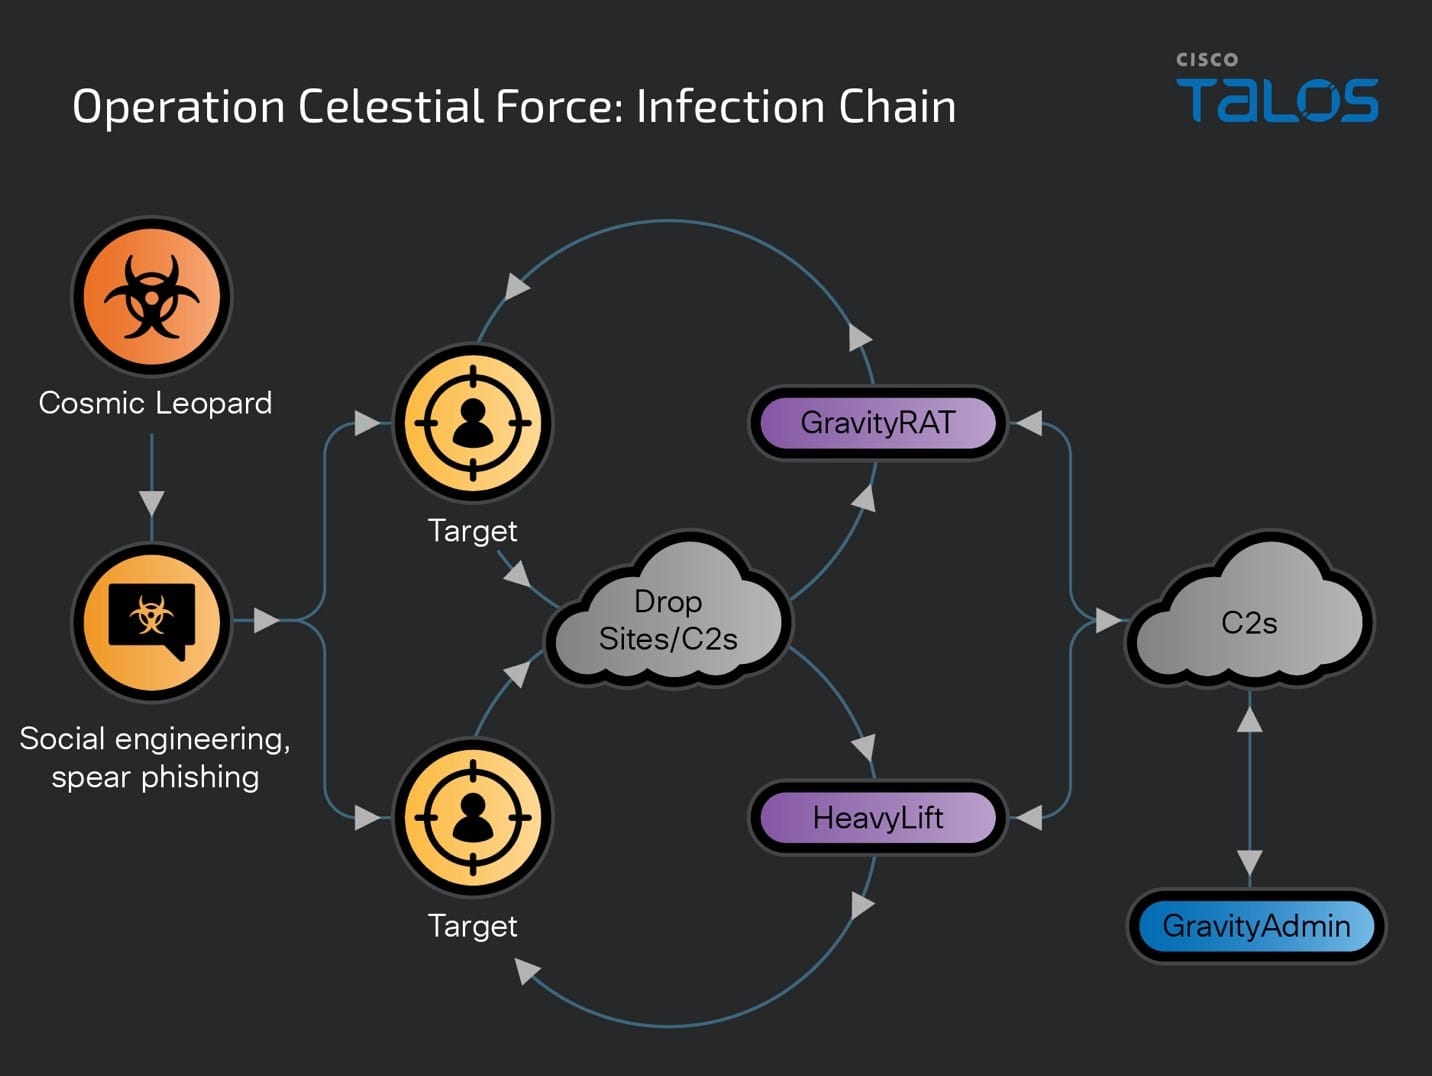 Operation Celestial Force employs mobile and desktop malware to target Indian entities